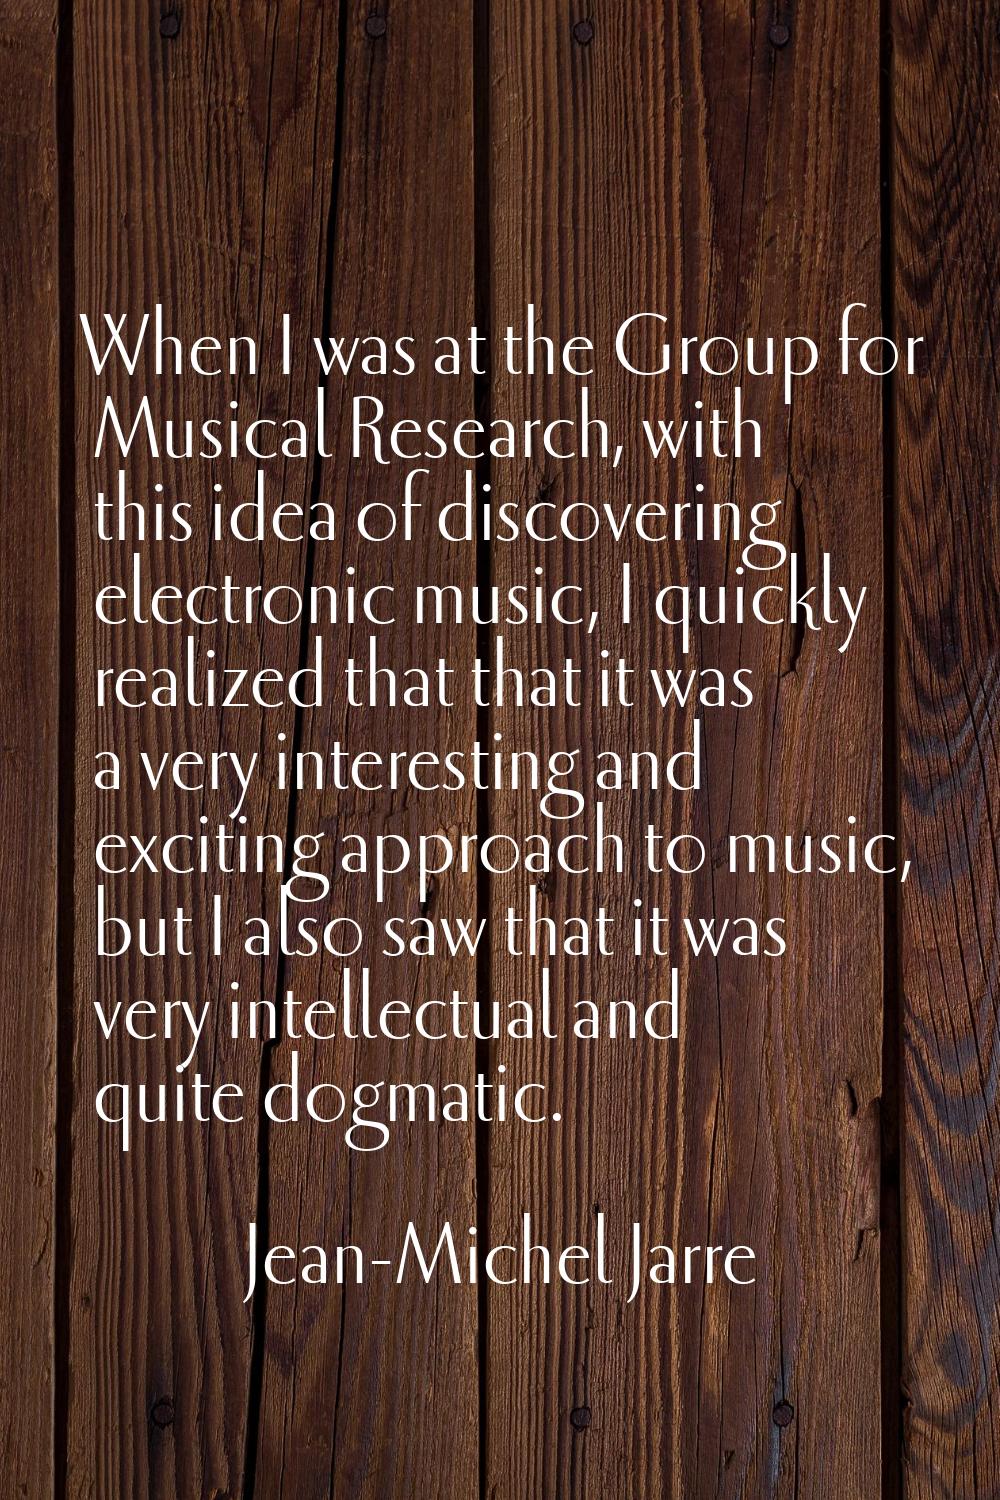 When I was at the Group for Musical Research, with this idea of discovering electronic music, I qui